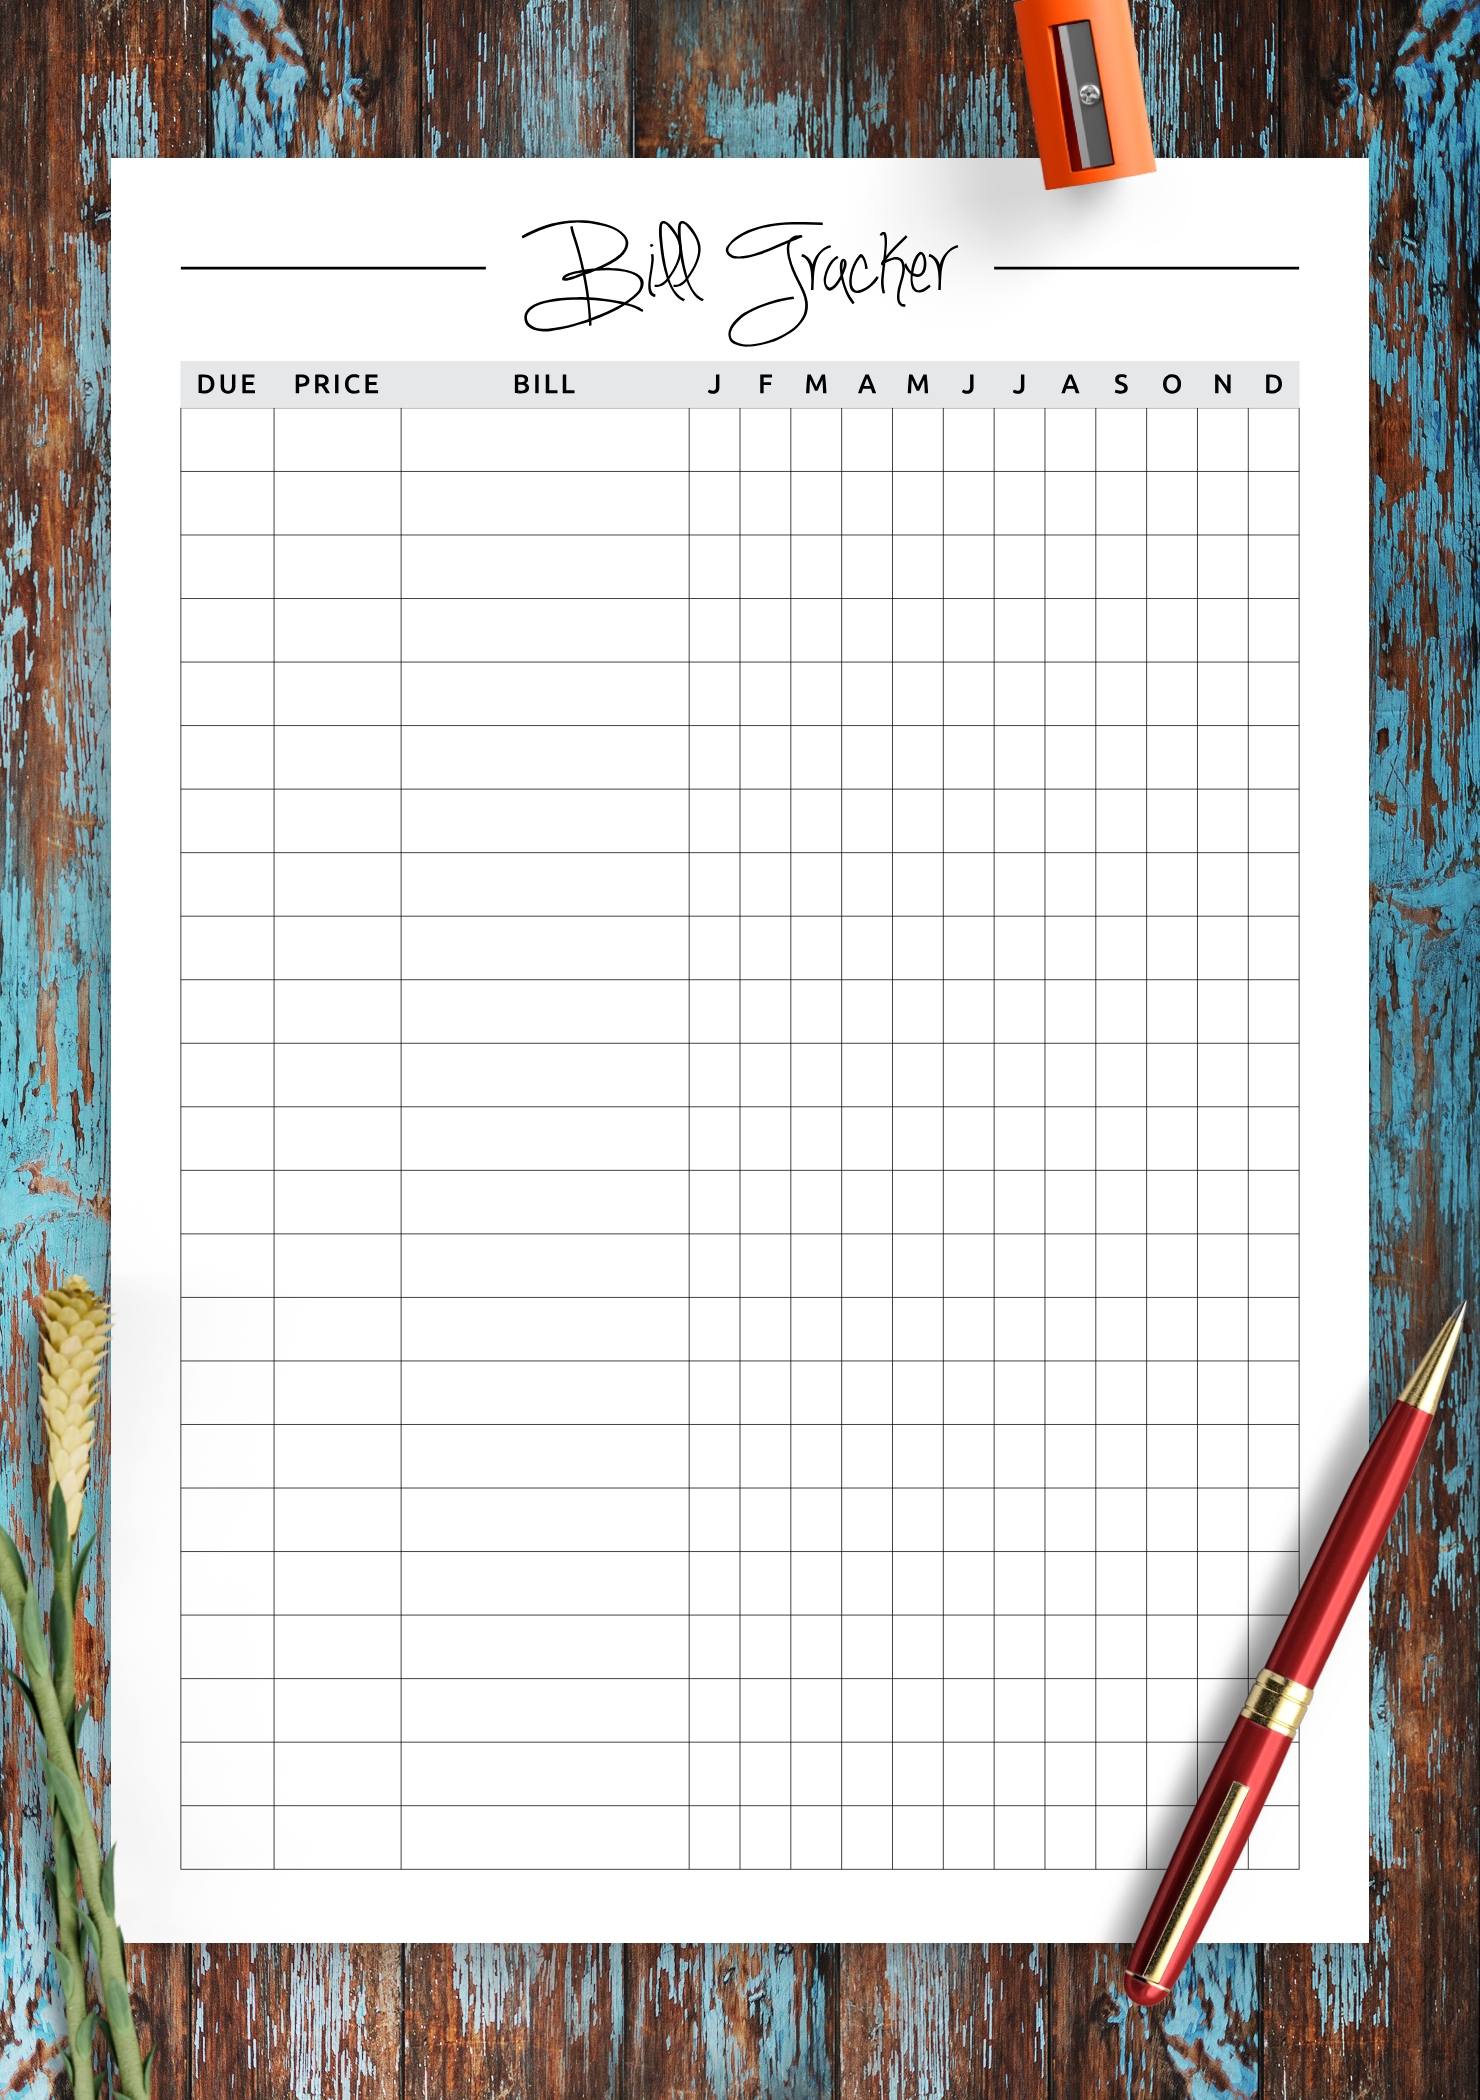 Download Printable Square Grid Monthly Bill Tracker Pdf-2021 Printable Bill Planner